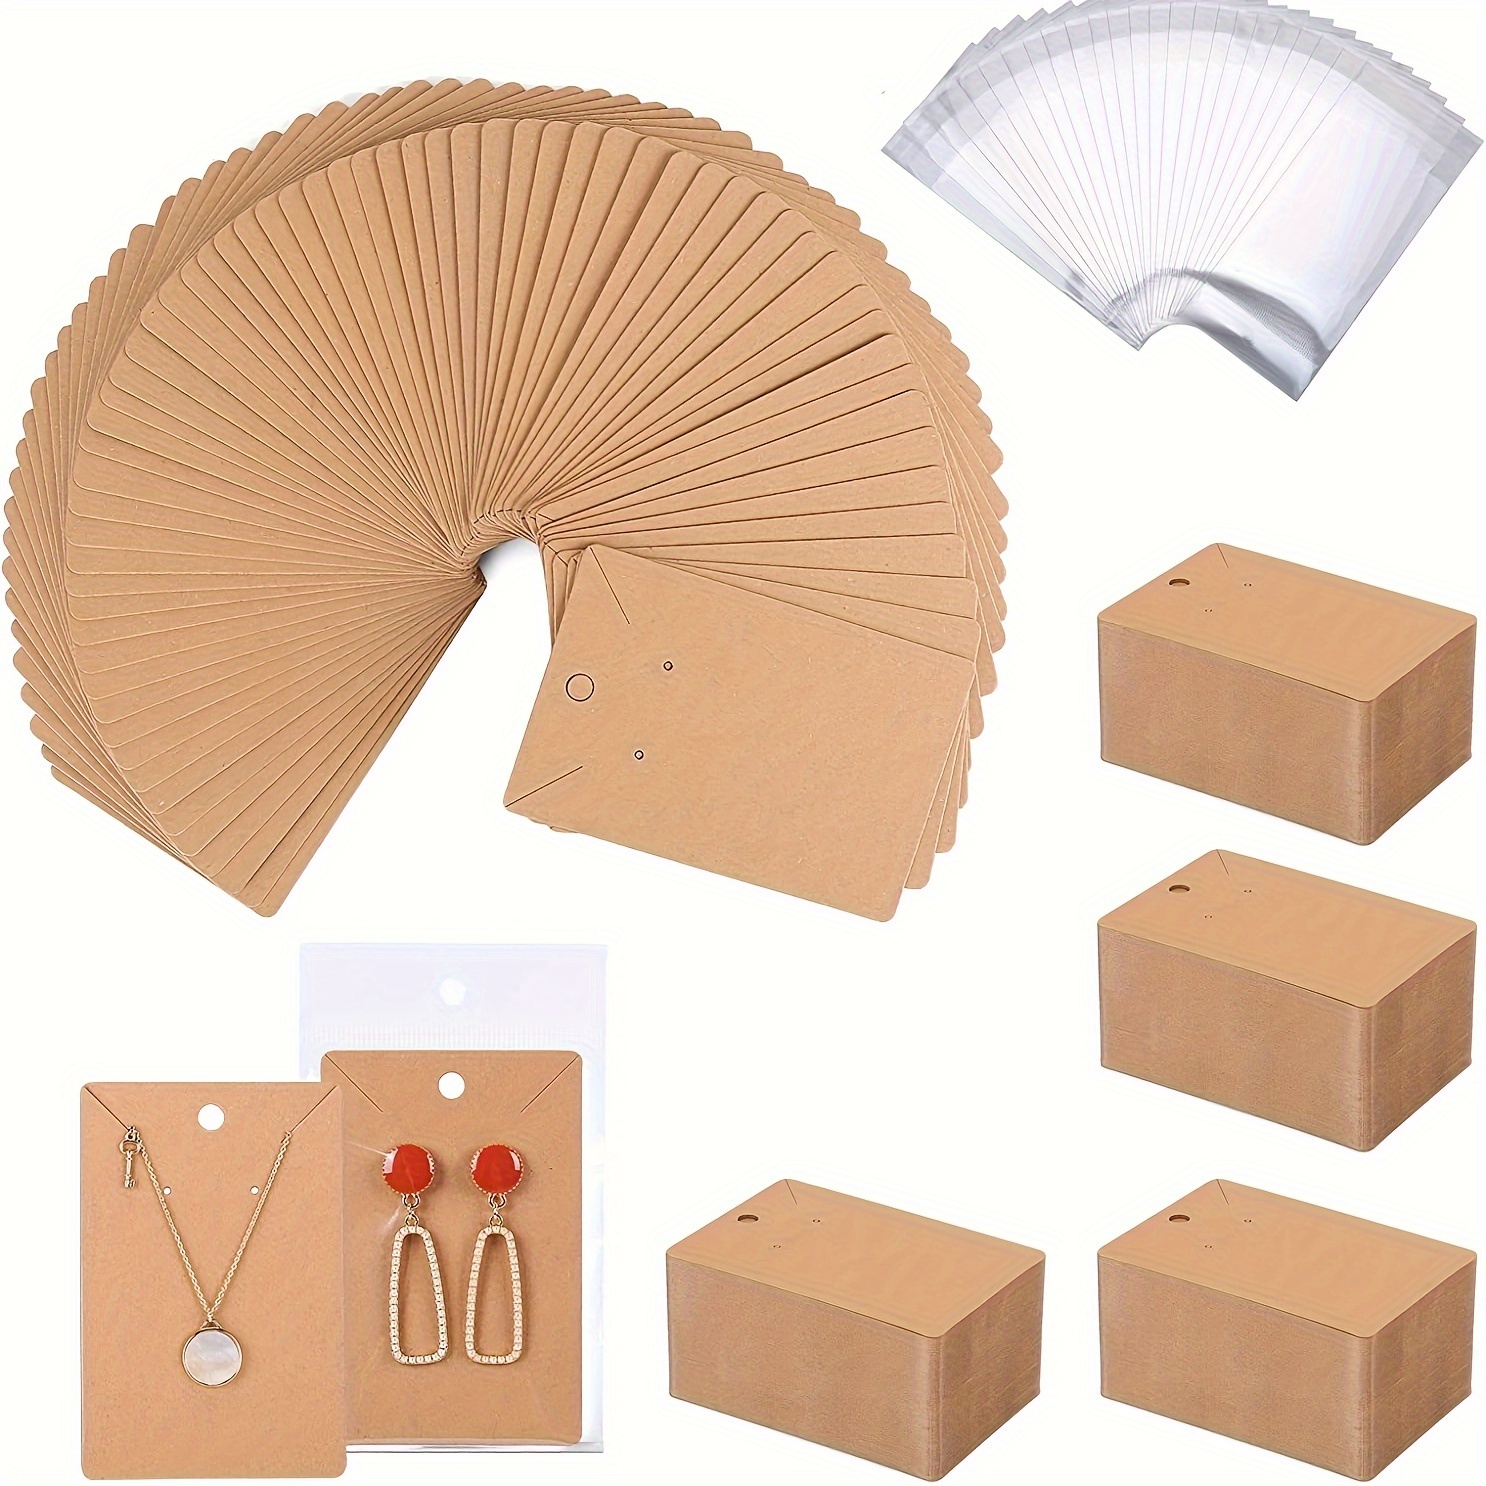 

50 Sets Kraft Paper Jewelry Display Cardboard, Necklaces Earrings Label Packaging With Opp Bags Small Business Supplies